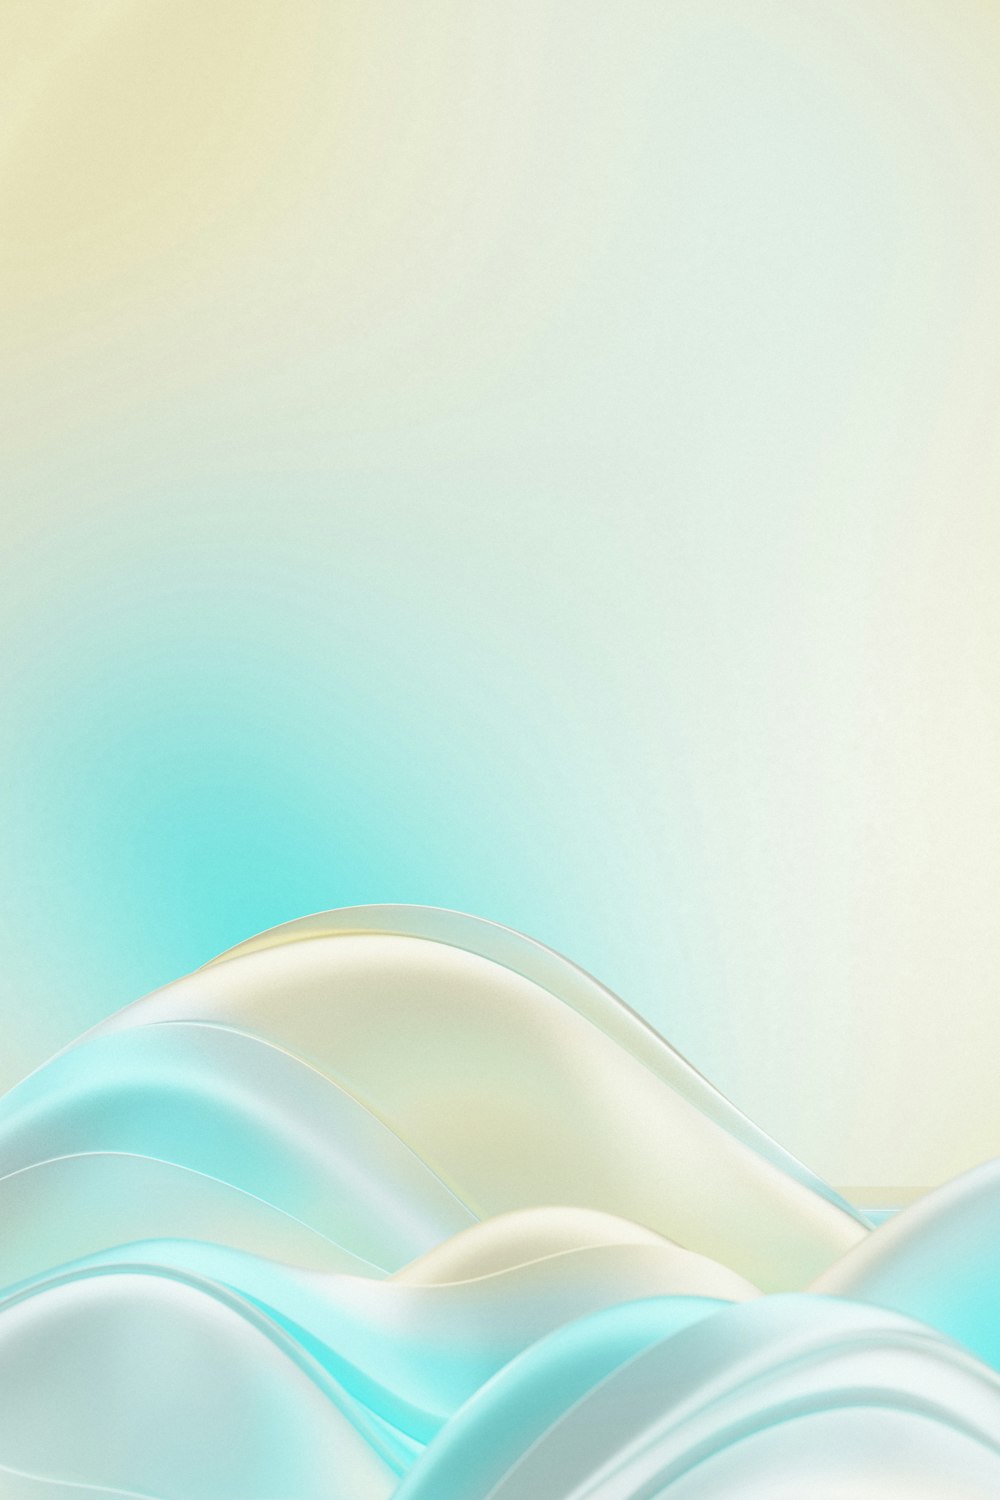 a blue and yellow background with a white wave